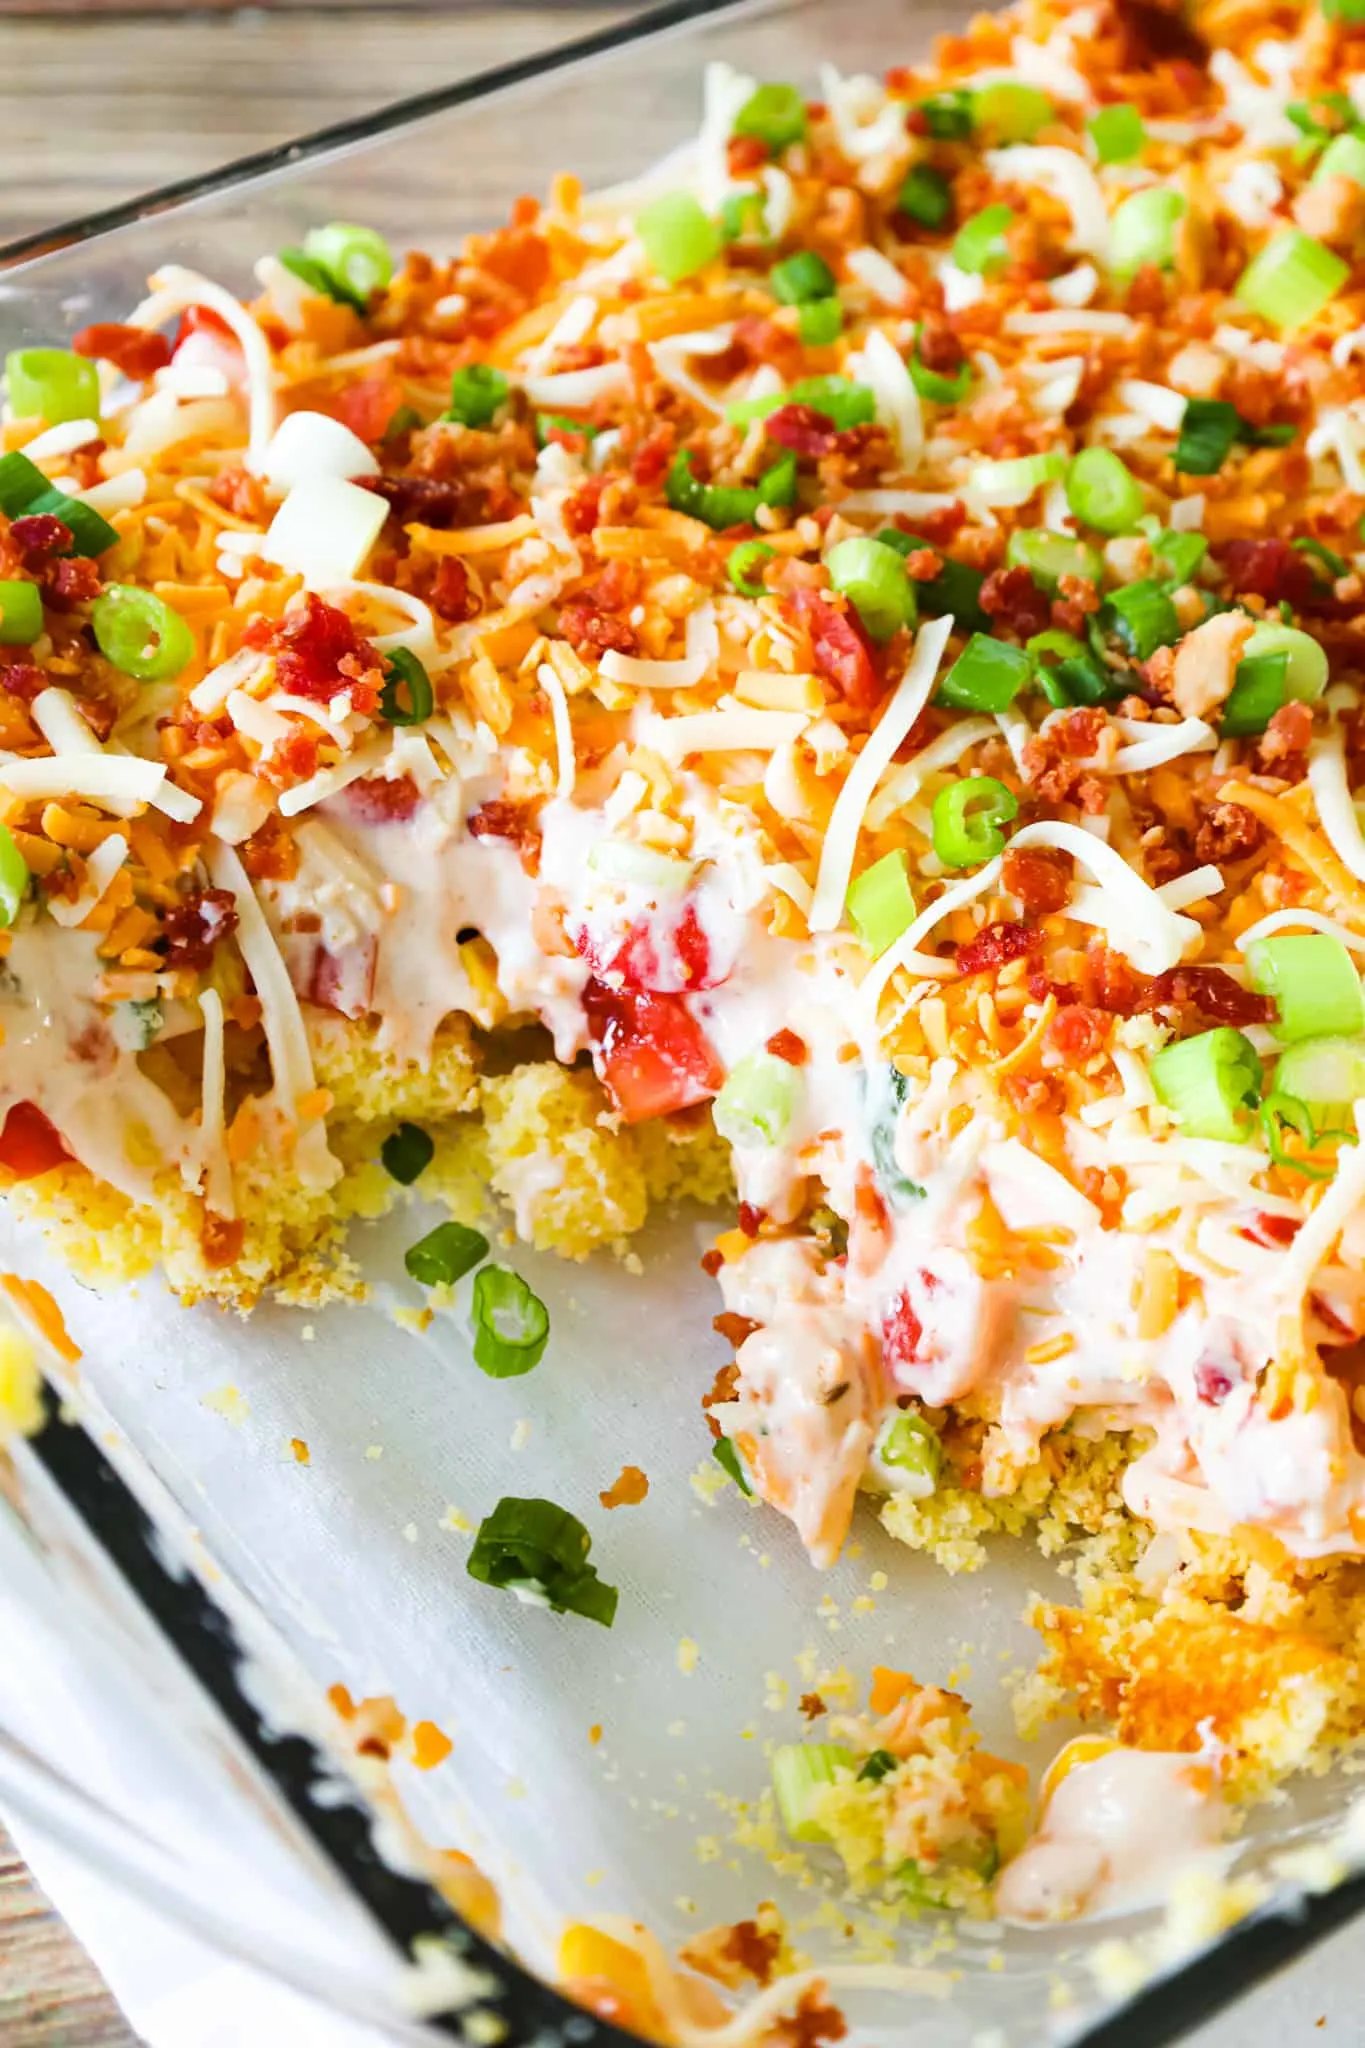 Cornbread Salad is a tasty side dish recipe loaded with cornbread pieces, diced tomatoes, diced bell peppers, corn, shredded cheese, chopped green onions, crumbled bacon and a dressing made from sour cream, ranch and salsa.